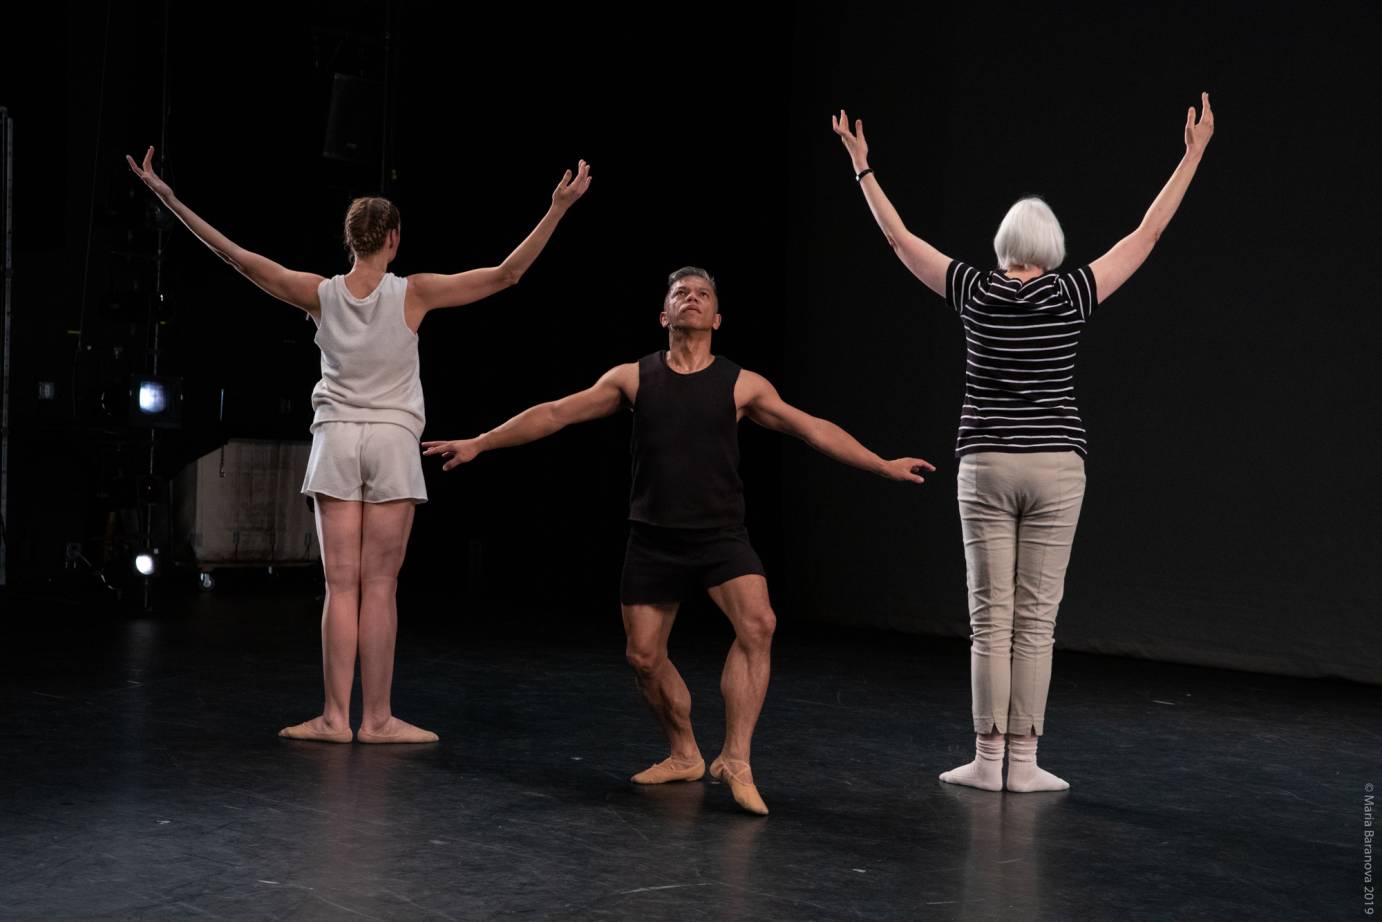 Two women extend their arms in high Vs, backs to audience, while one man extends his arms in a low V